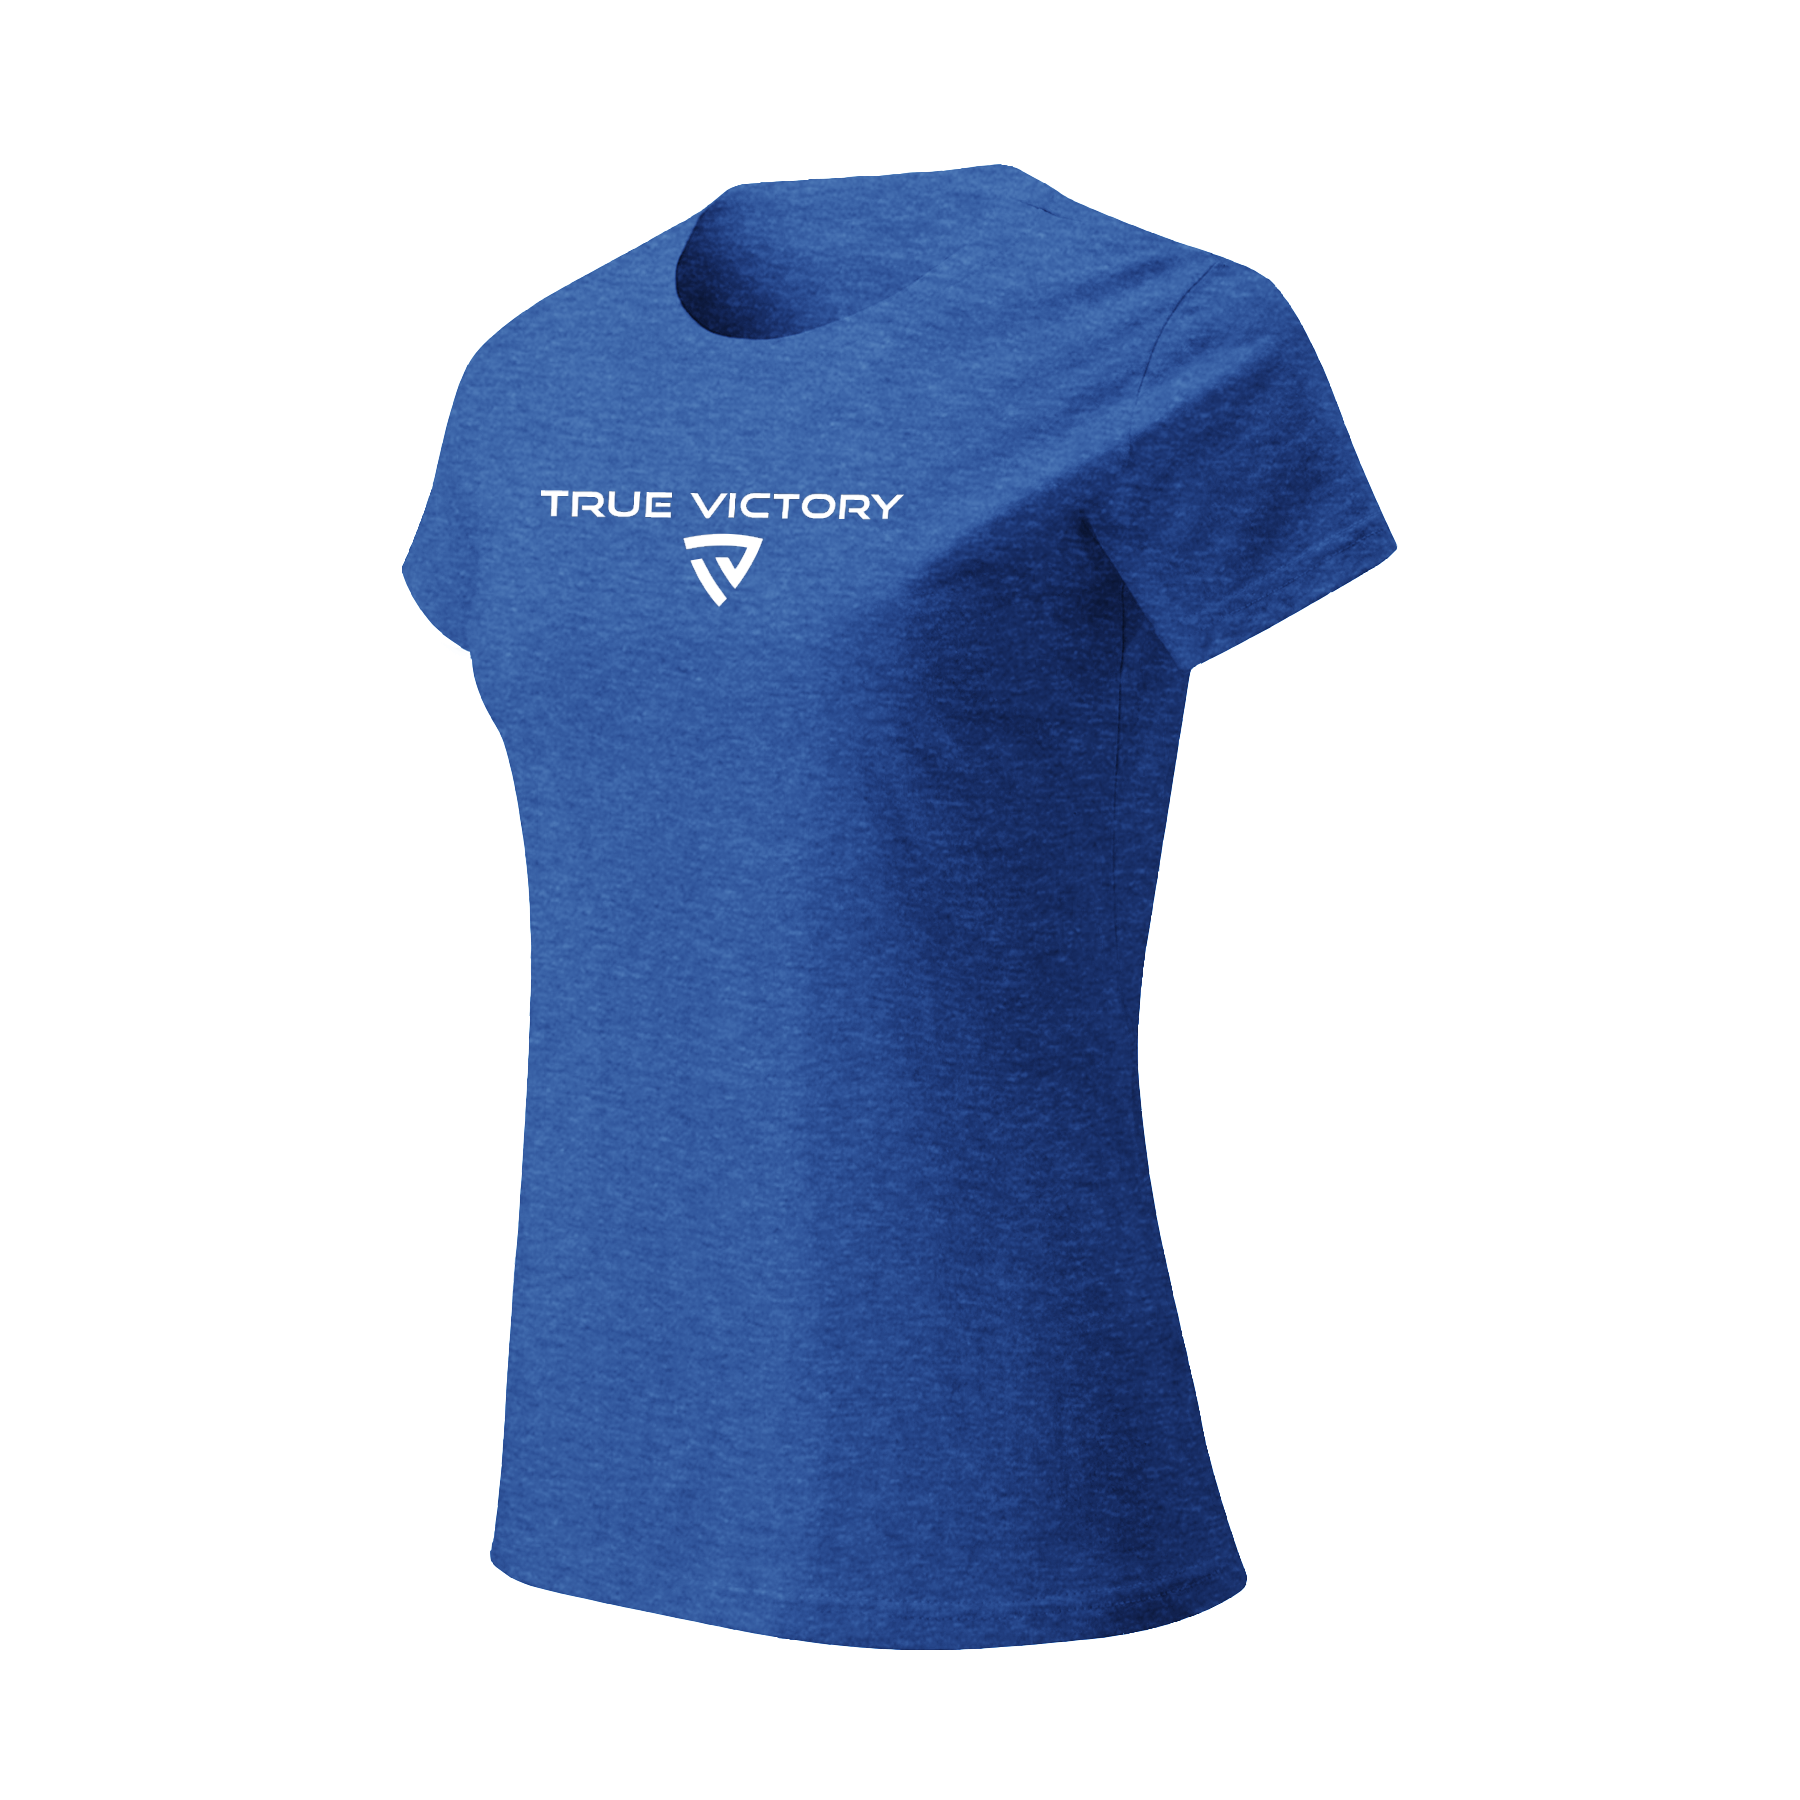 Women's Victorious Royal Tee